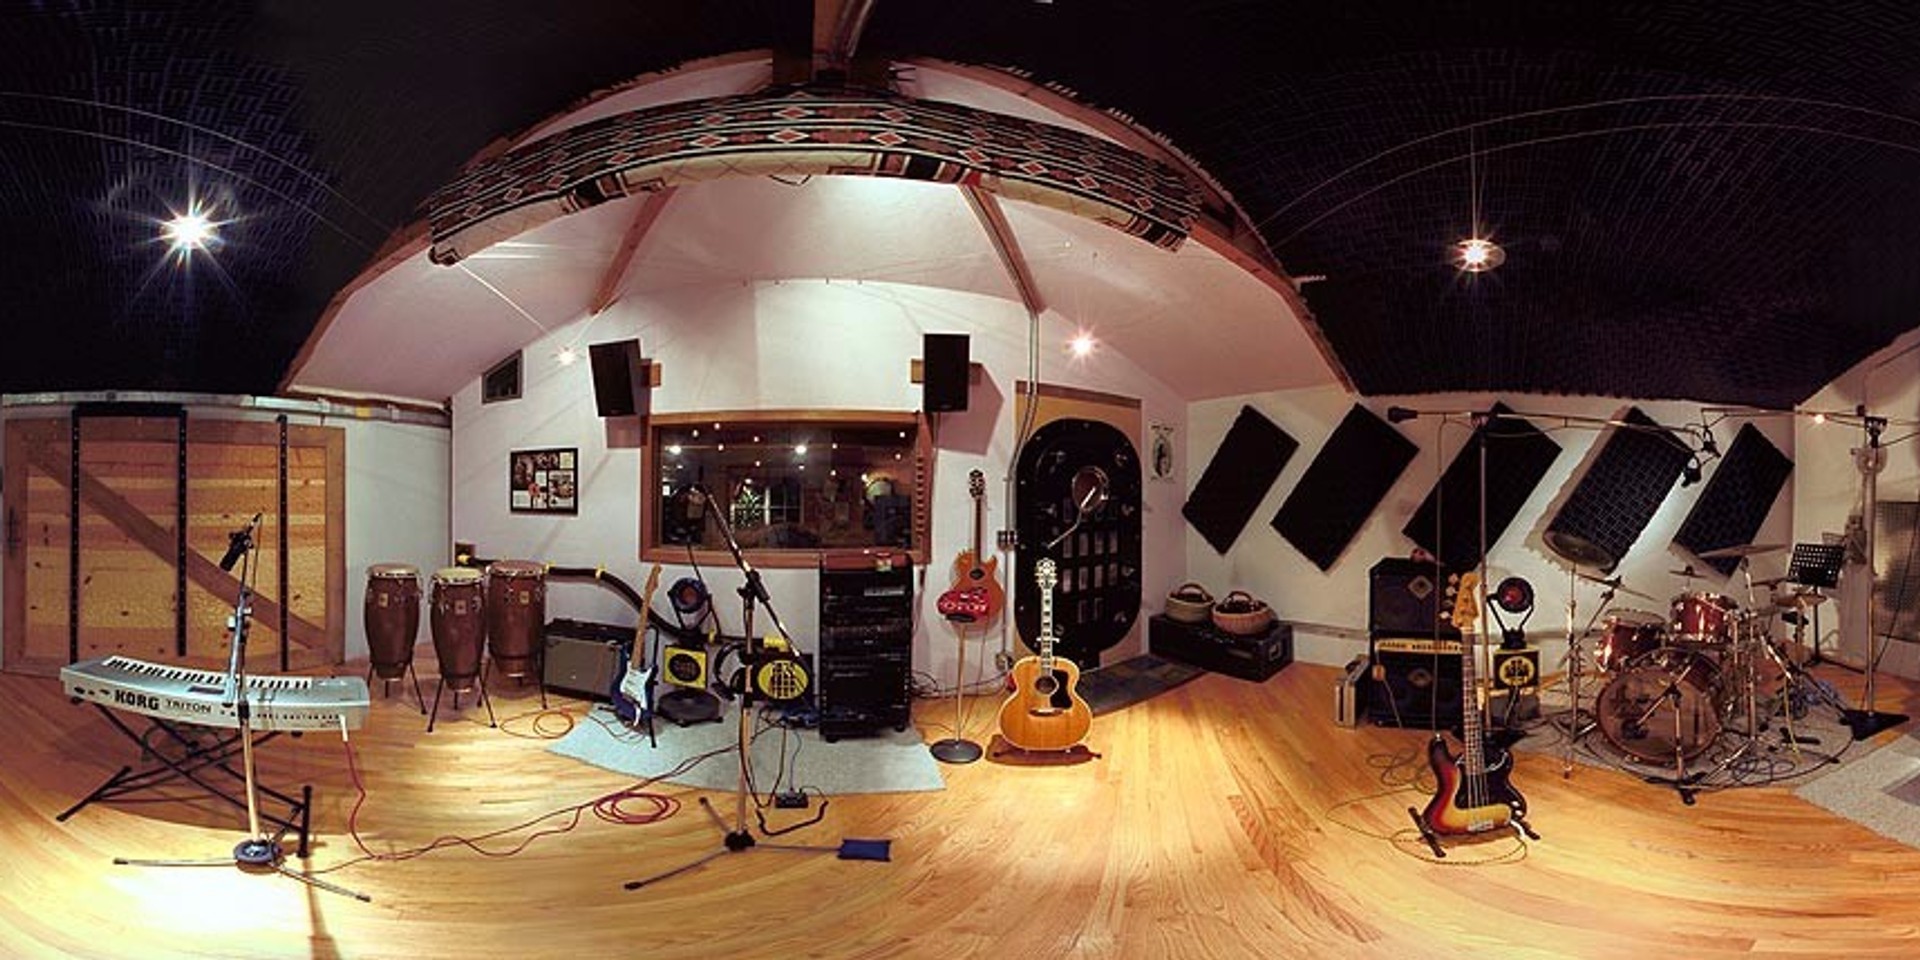 *SCAPE opens up jamming and recording studios in Music Village